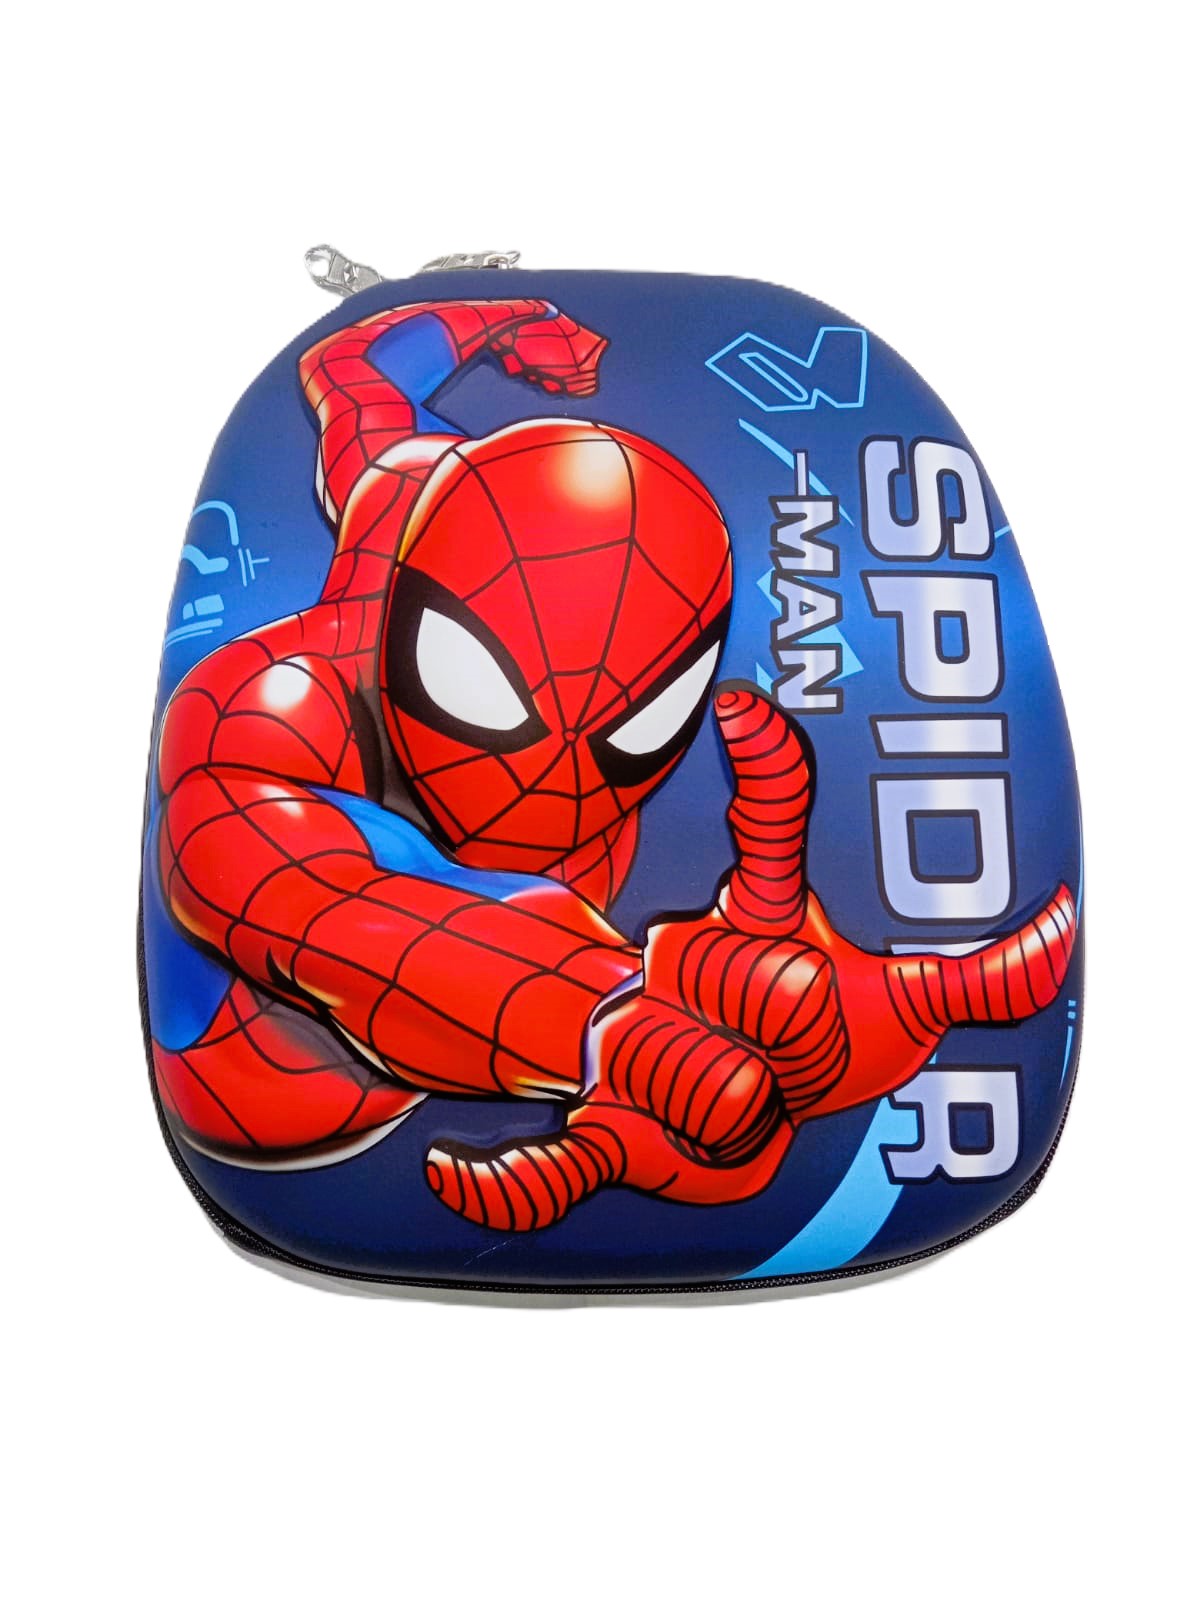 Hard-Case Mini Bags for Kids (Animated Spiderman Edition)